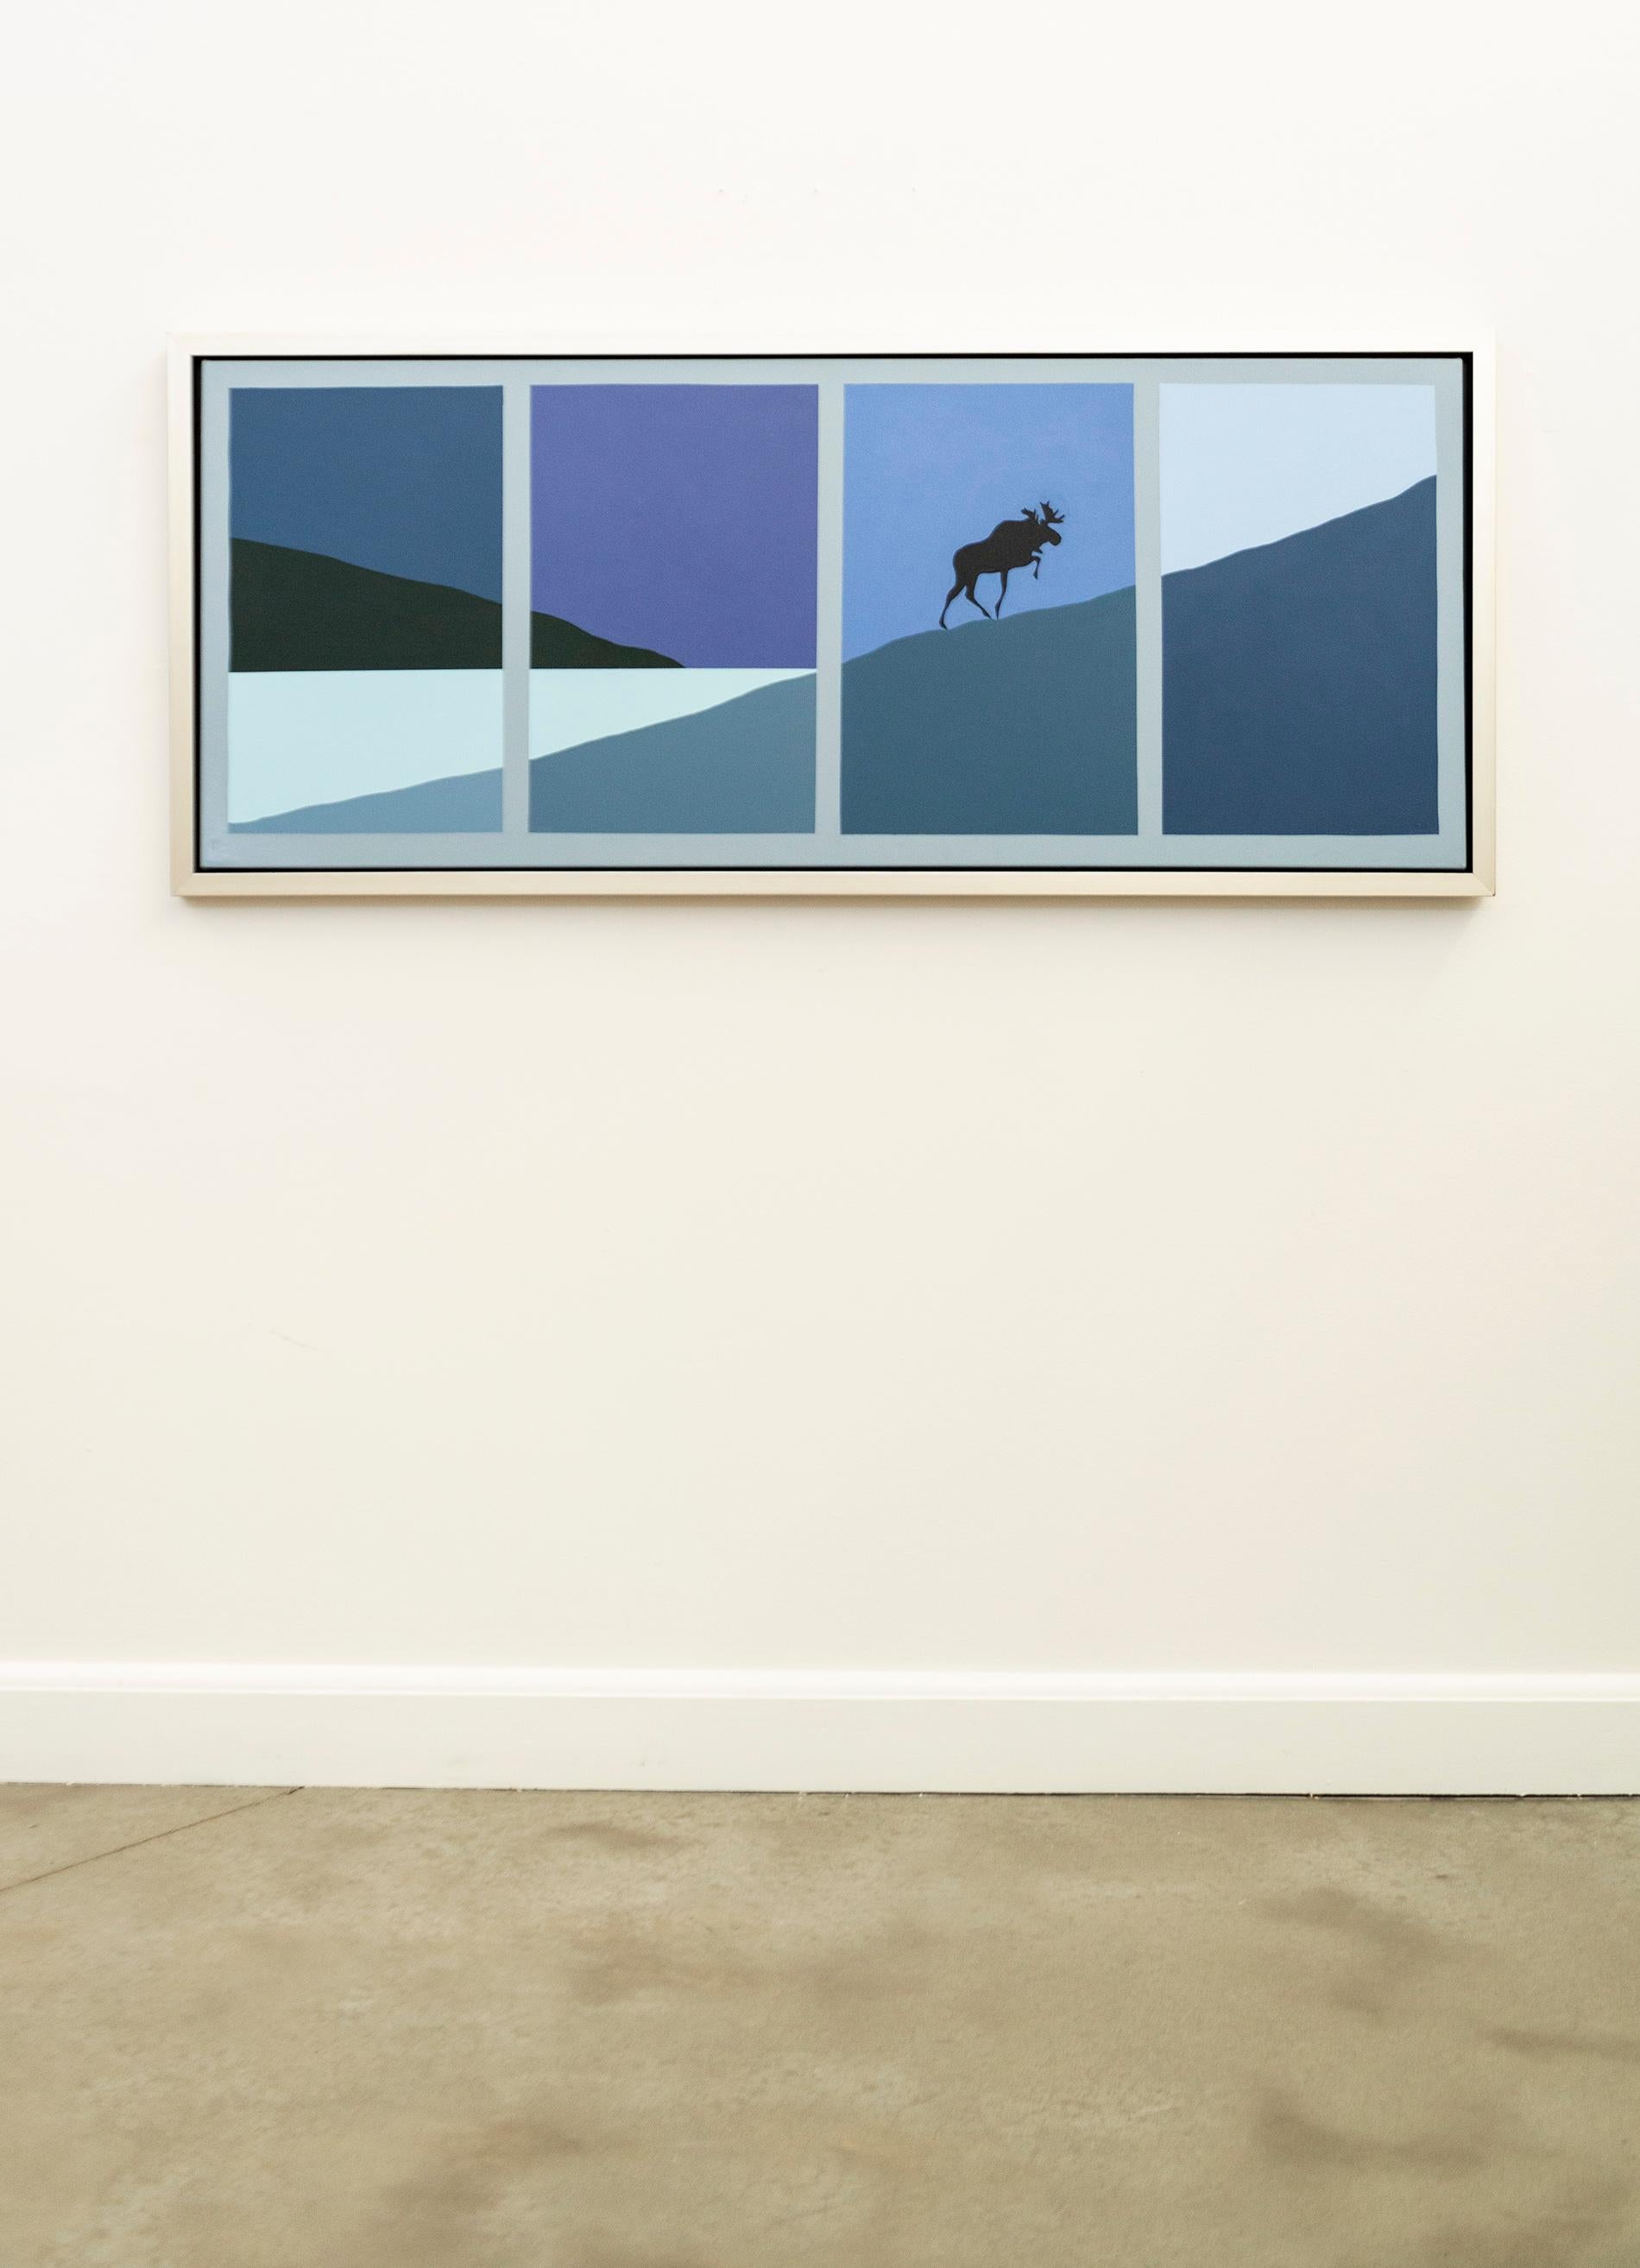 In this panoramic view of the Canadian wilderness by Charles Pachter—a lone moose climbs a mountain framed by a lake and sky. Famous for his iconic national imagery, Pachter’s contemporary artwork has often featured a moose, an endearing majestic